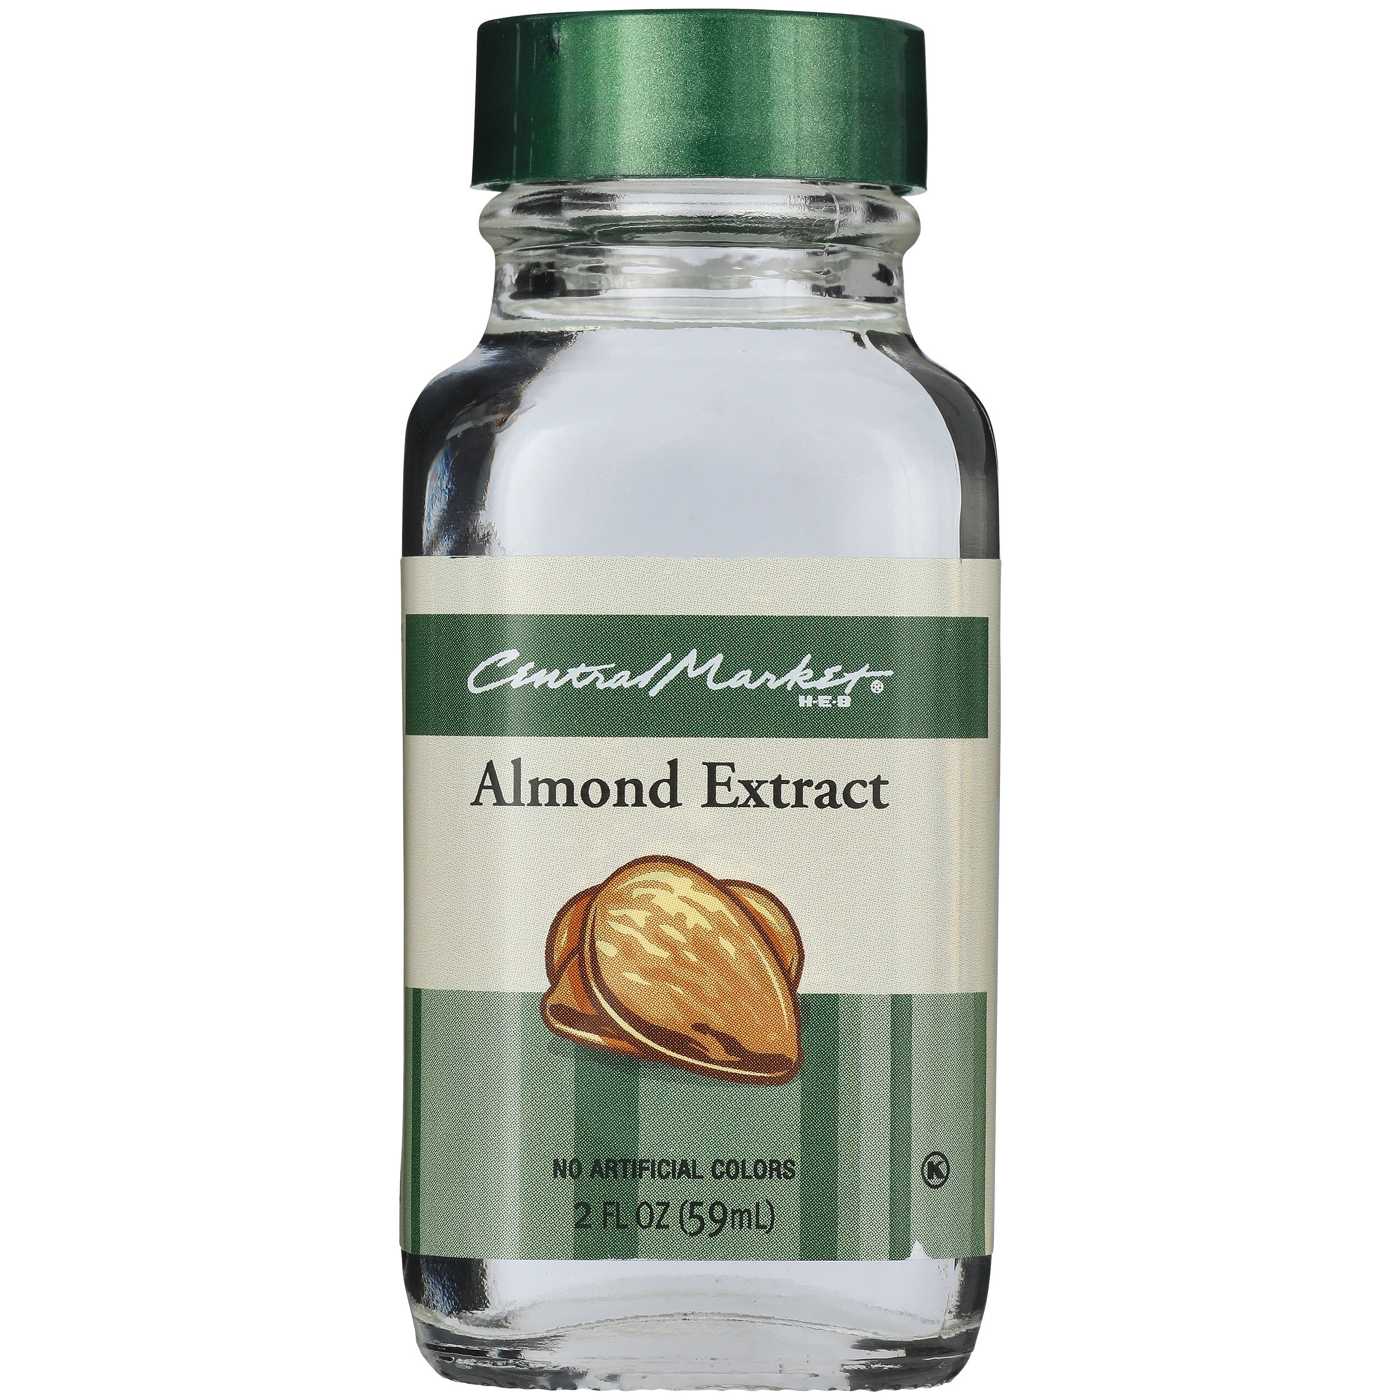 Central Market Almond Extract; image 1 of 2